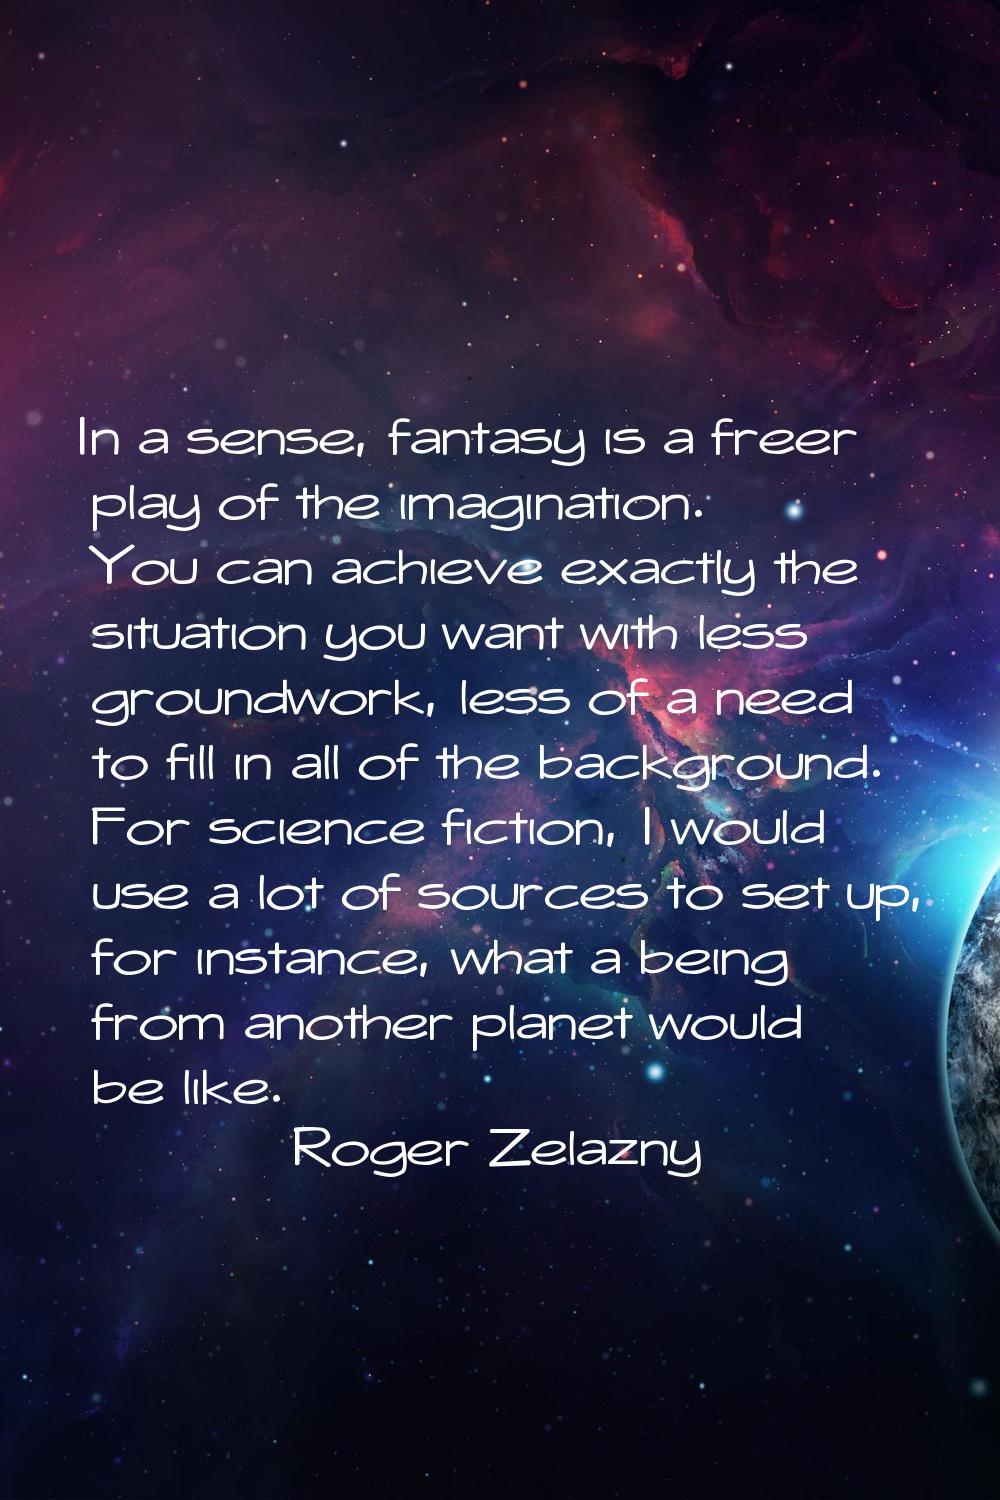 In a sense, fantasy is a freer play of the imagination. You can achieve exactly the situation you w